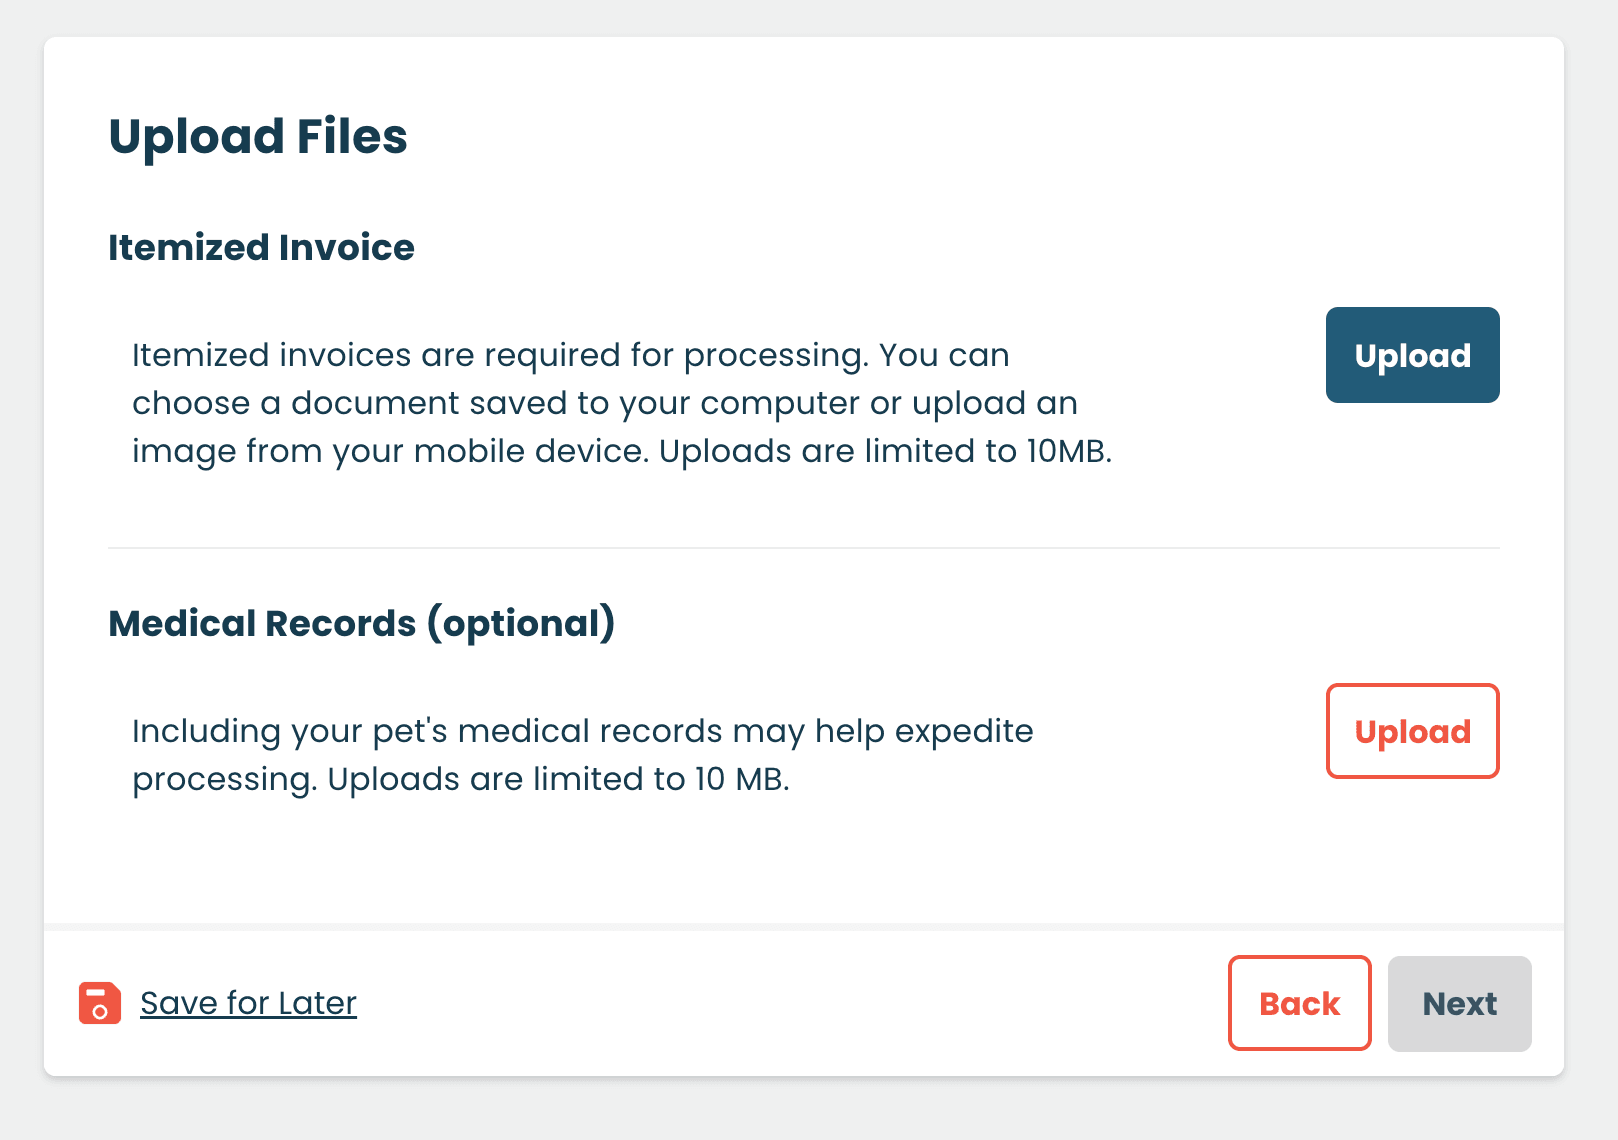 The screenshot shows an "Upload Files" webpage section with options to upload an itemized invoice and optional medical records.